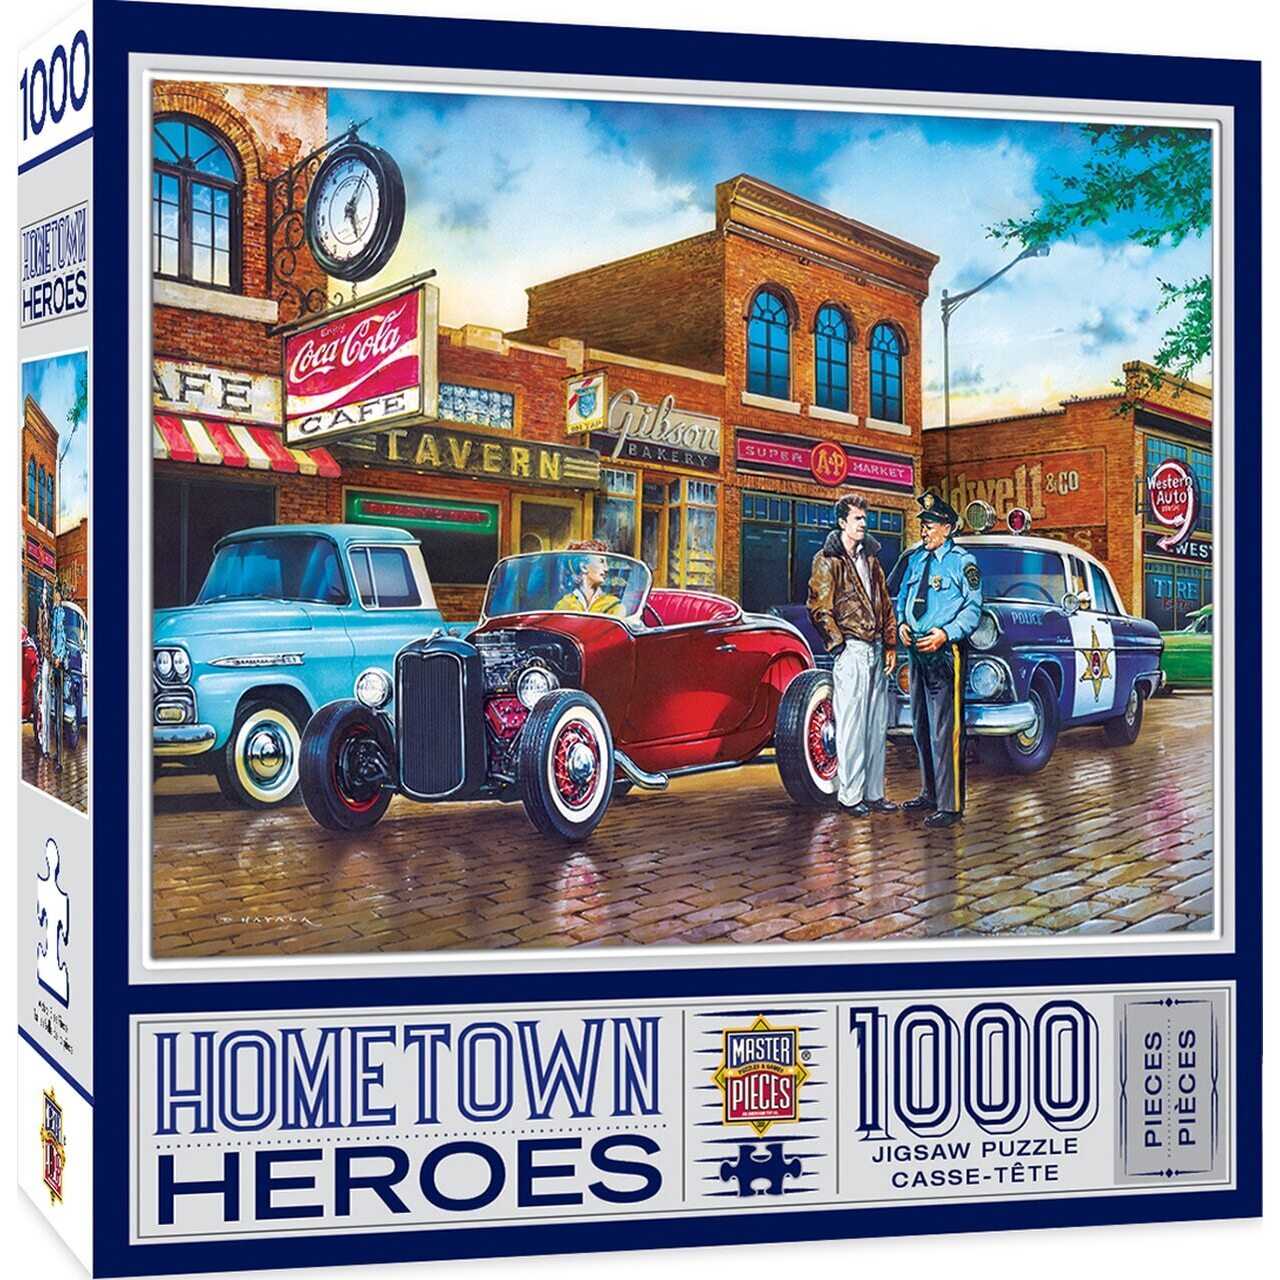 Hometown Heroes a Little Too Loud -1000 Piece Jigsaw Puzzle